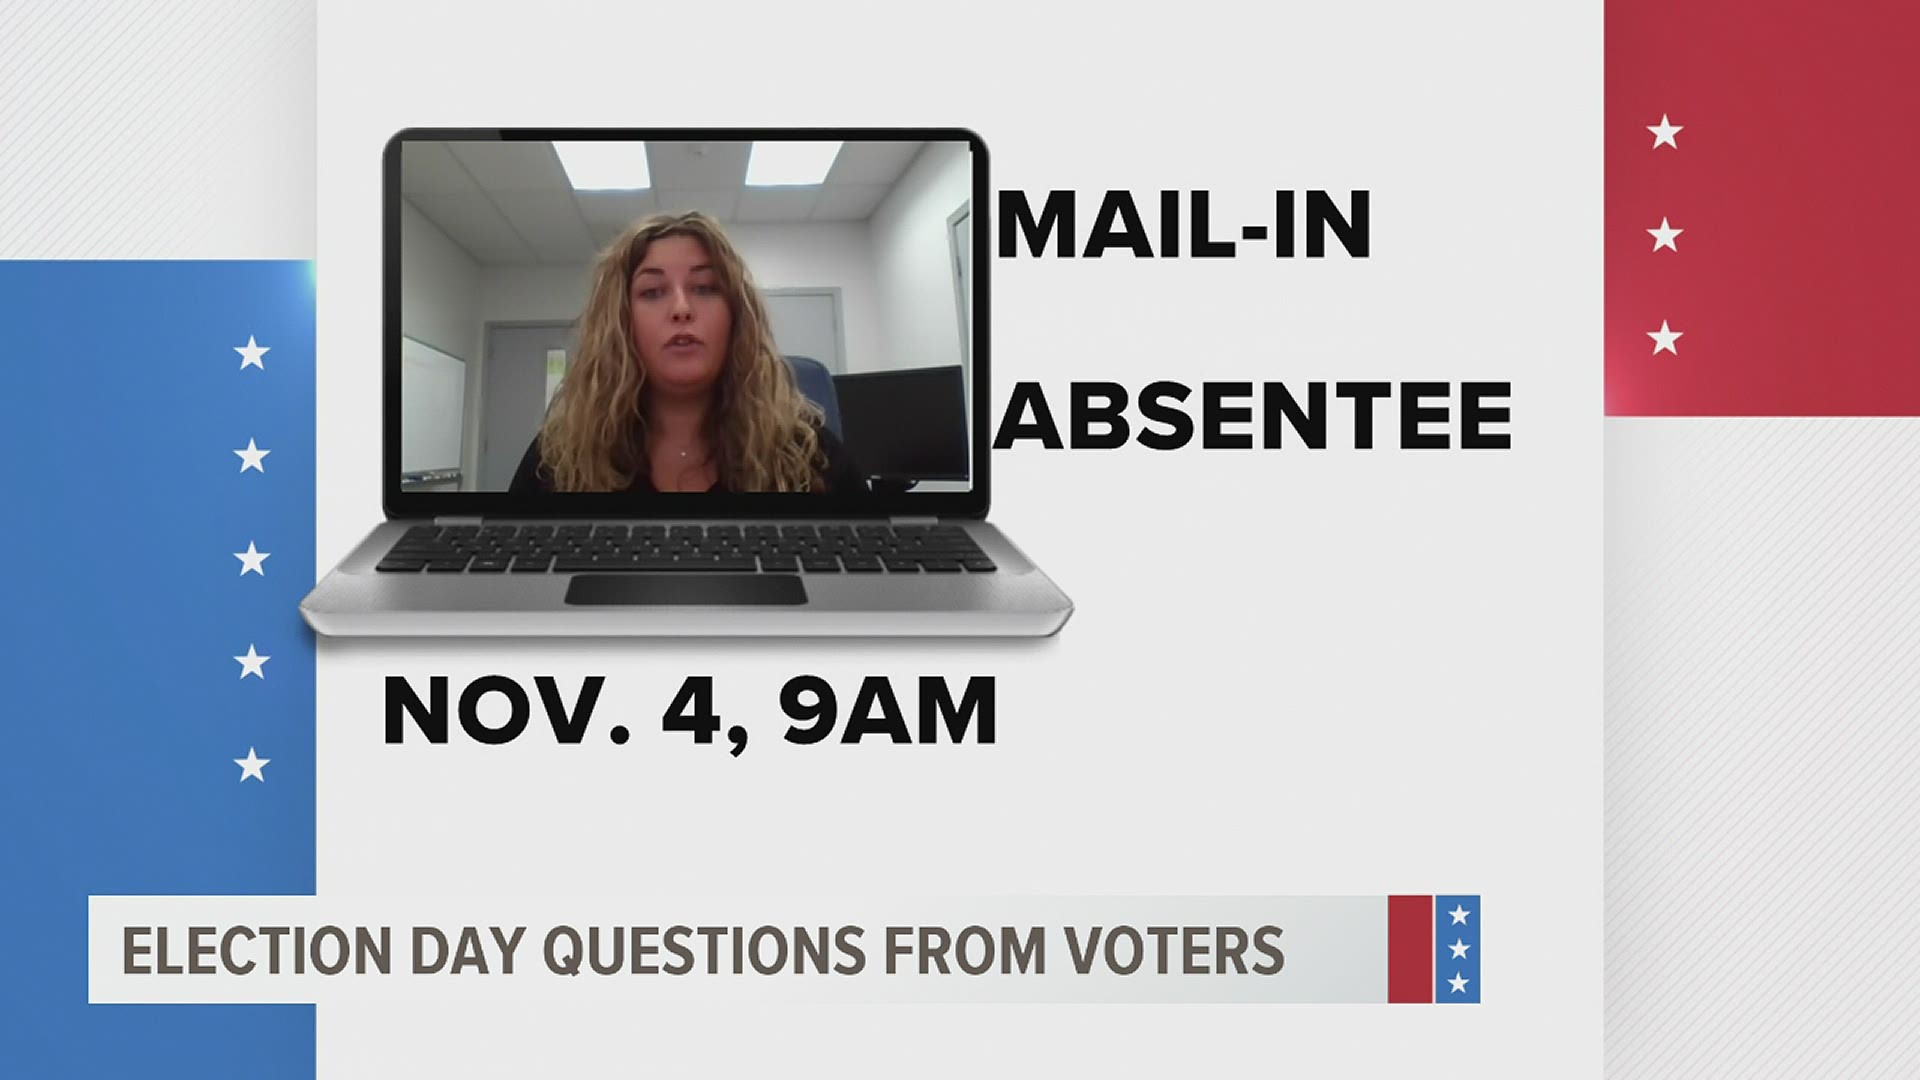 Cumberland County will not begin counting mail-in and absentee ballots until November 4.